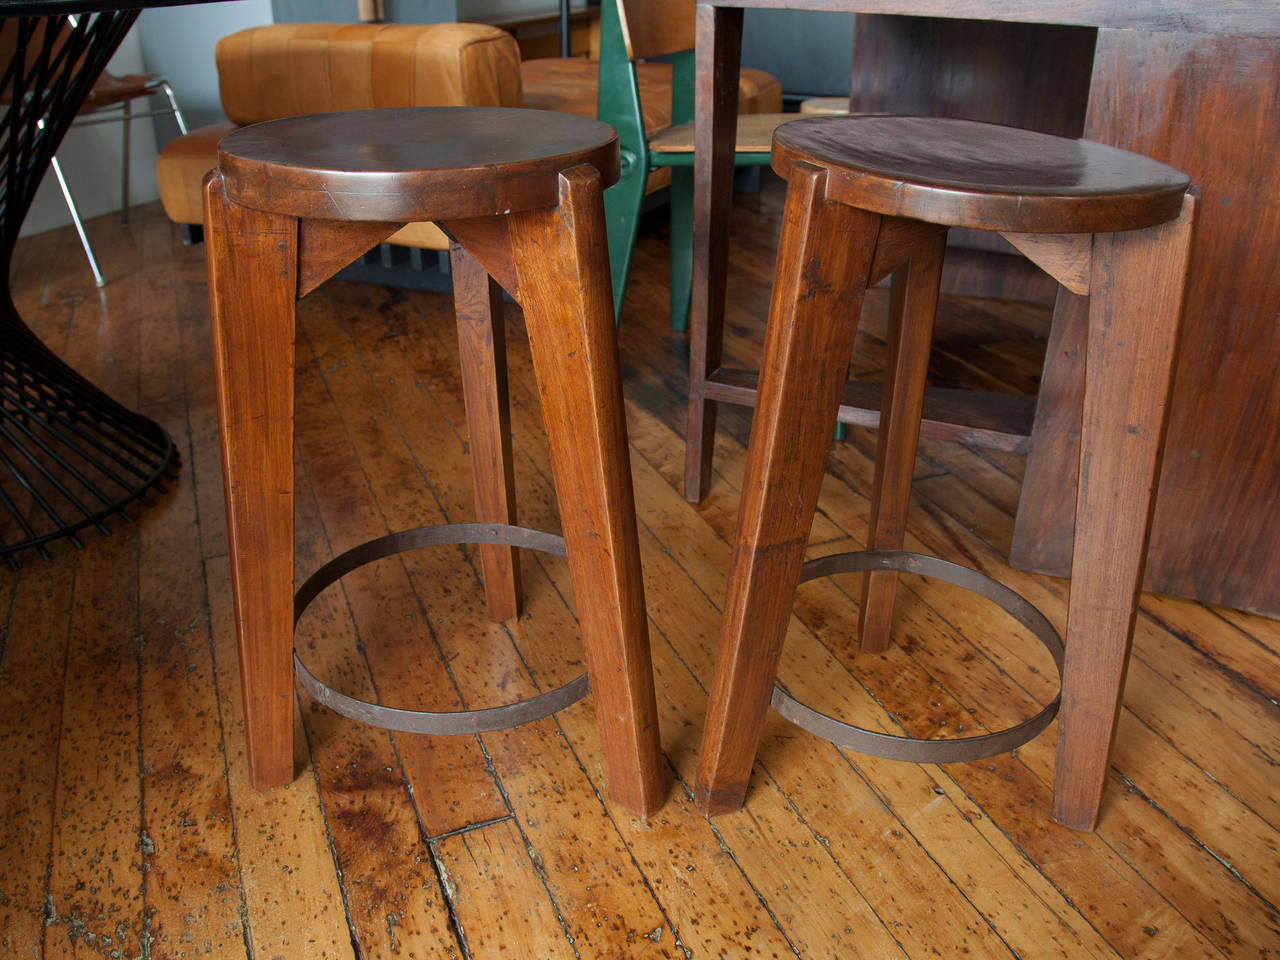 Stools with slightly concave, round seat and tapered legs in teak, by Pierre Jeanneret. From Punjab University in Chandigarh, India.